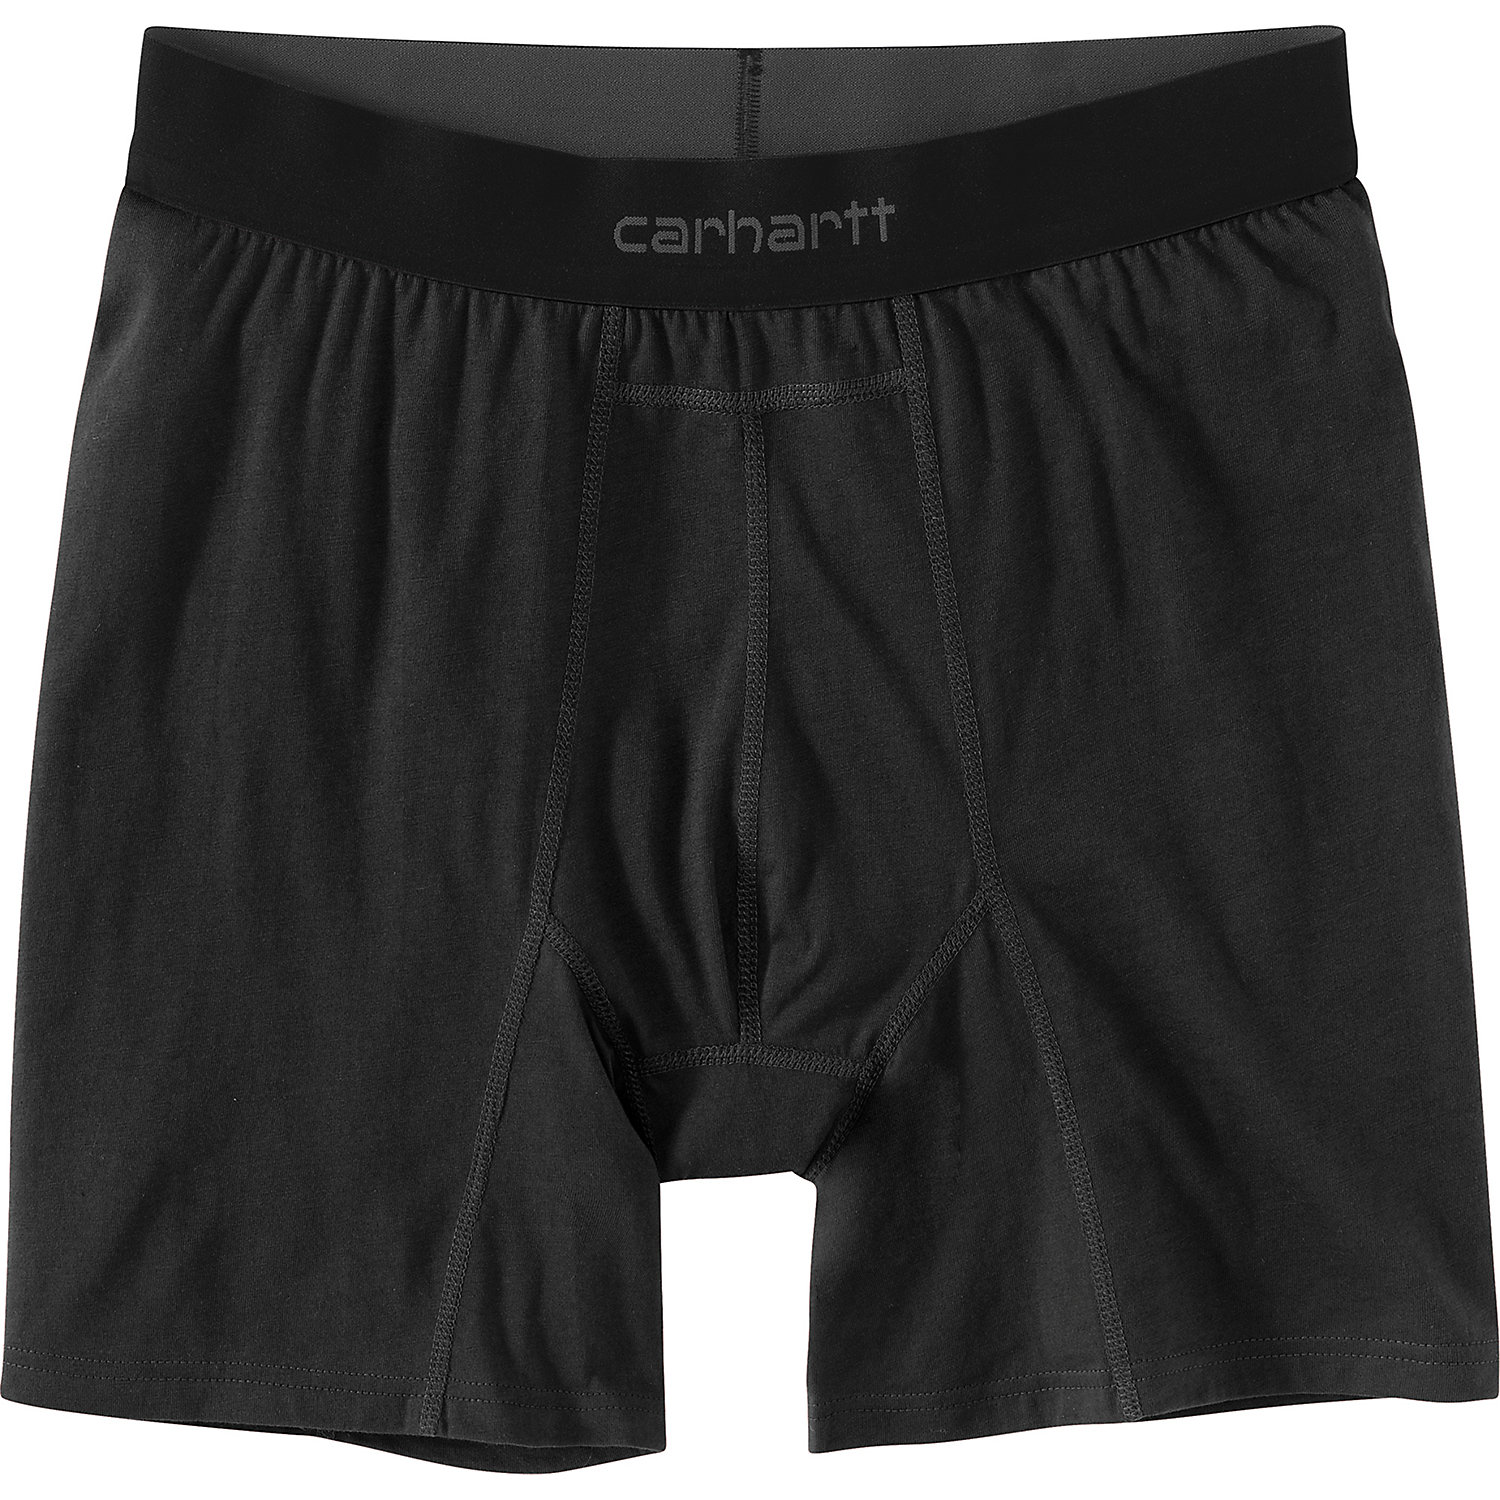 Carhartt Mens 8 Inch Basic Cotton-Poly Boxer Brief 2 Pack